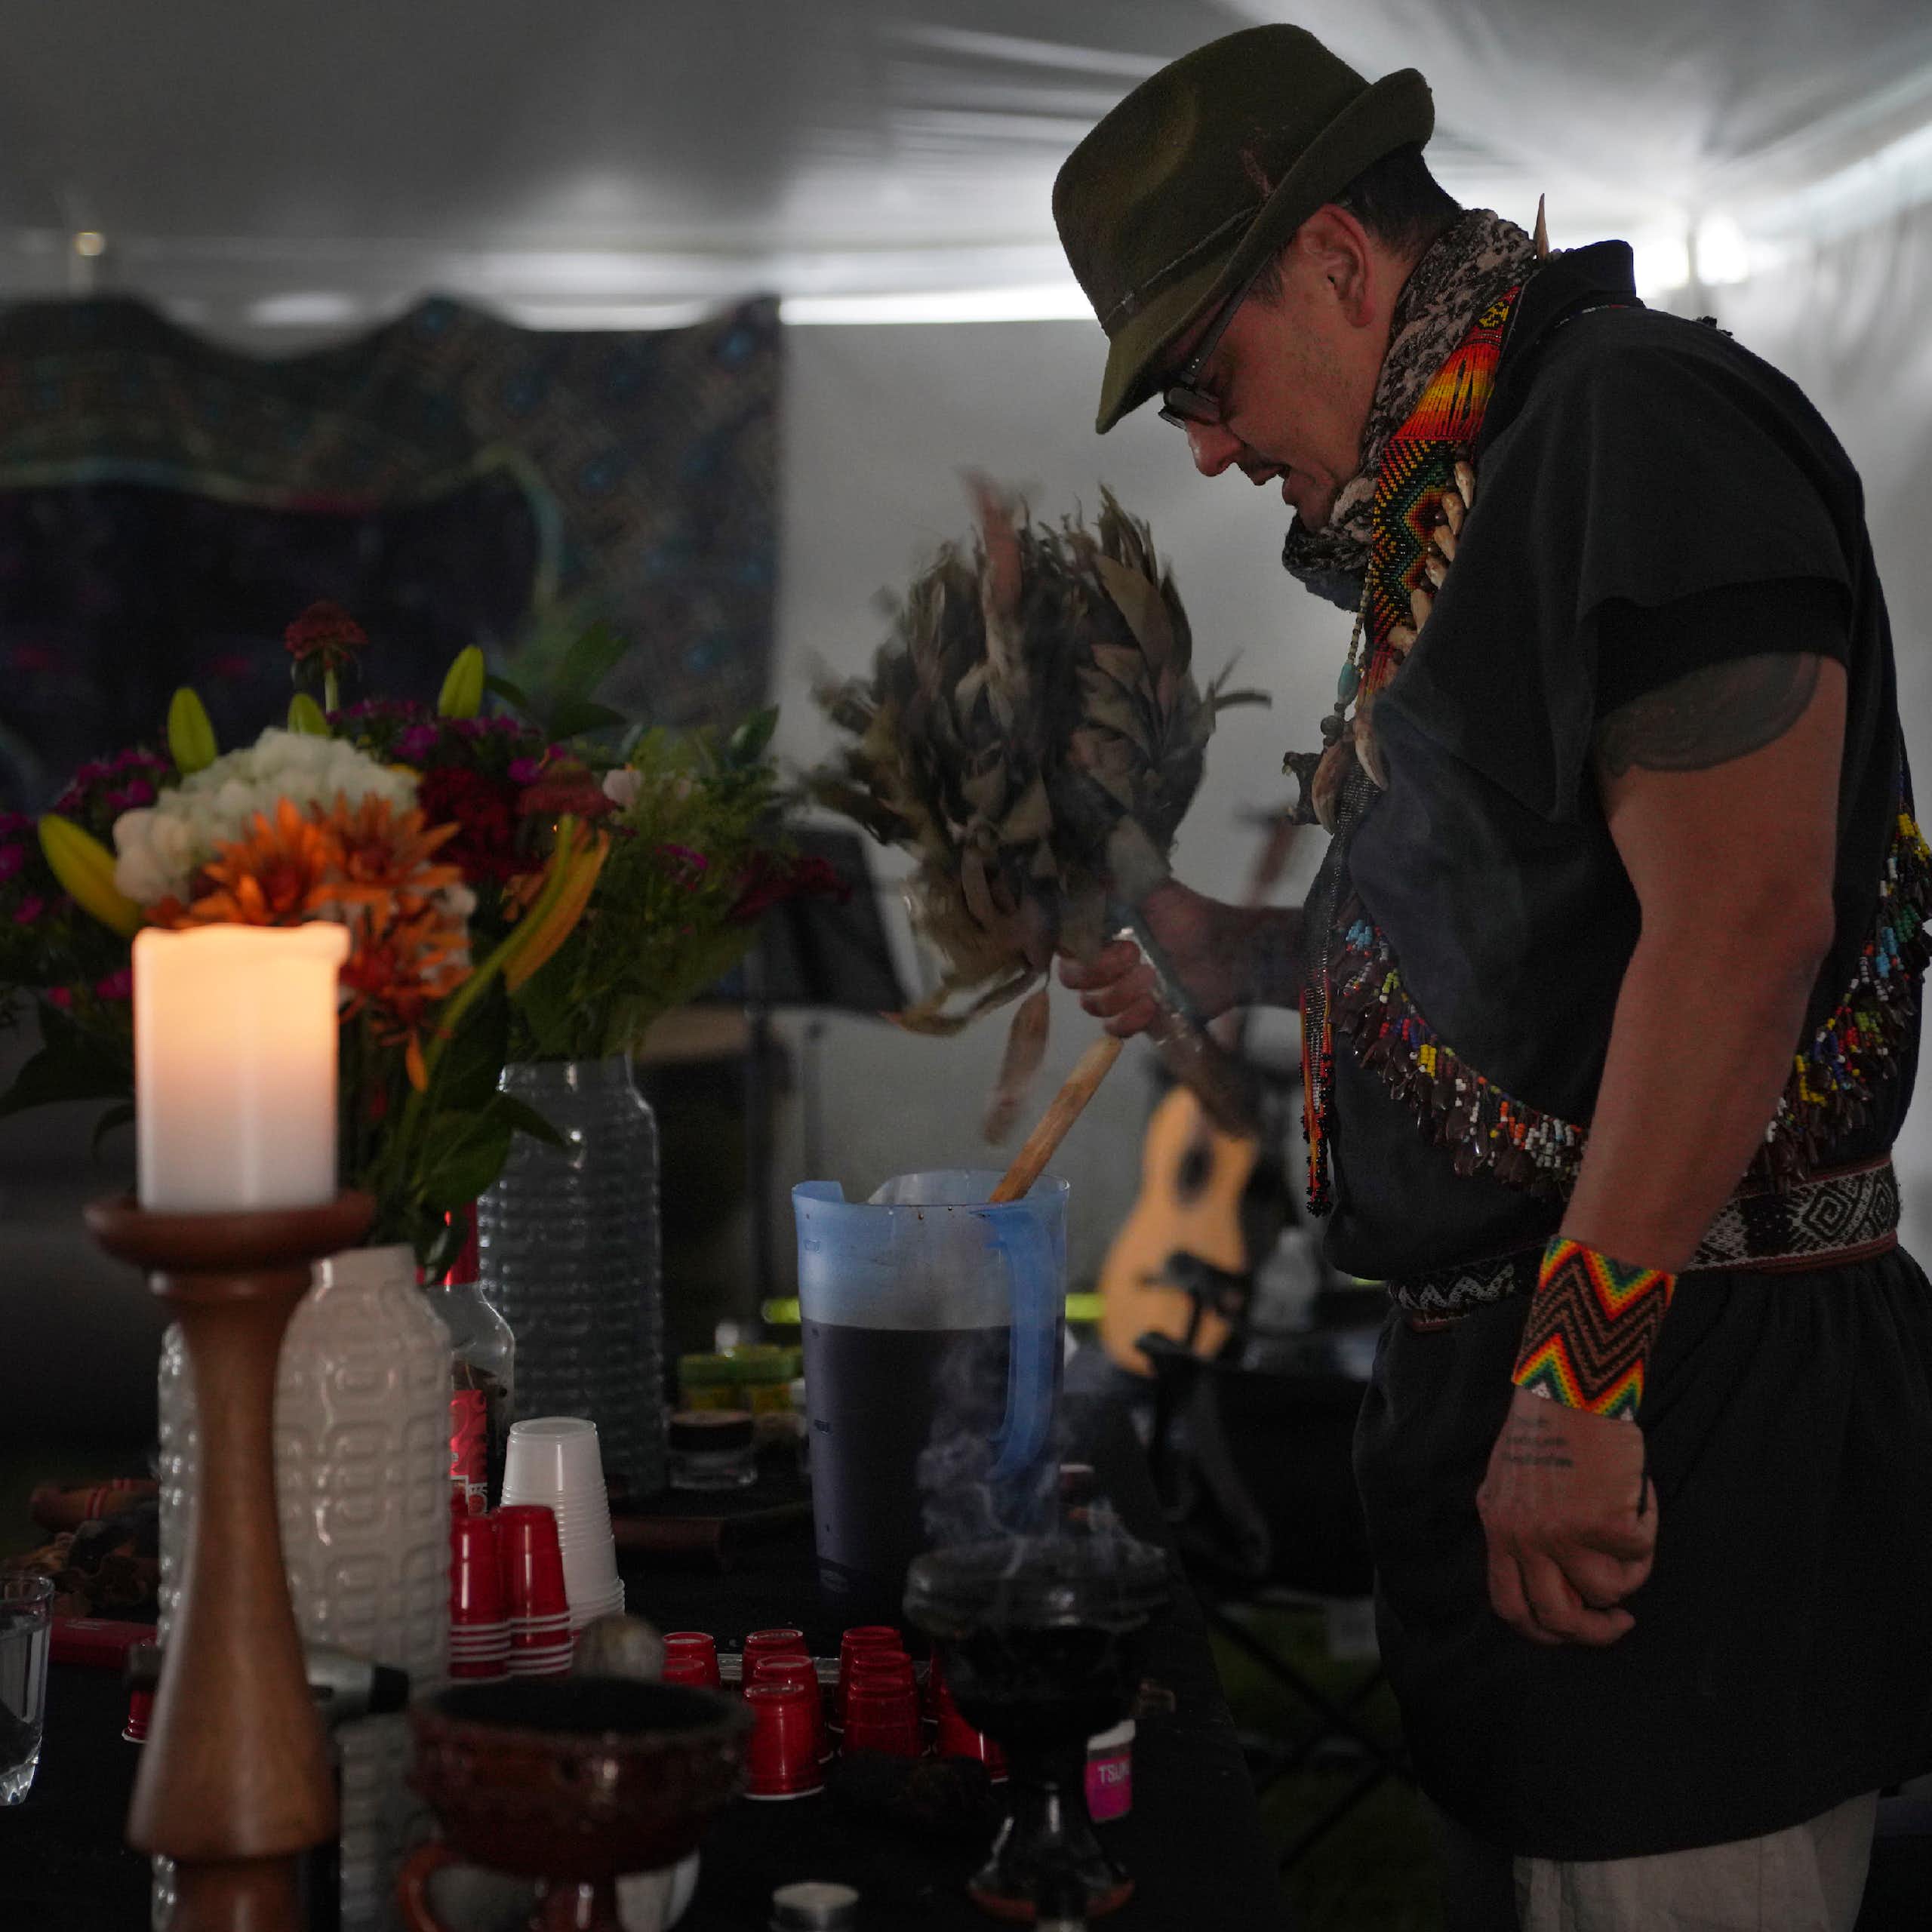 A man in a hat bowing his head before an altar on which are candles, flowers and other items.